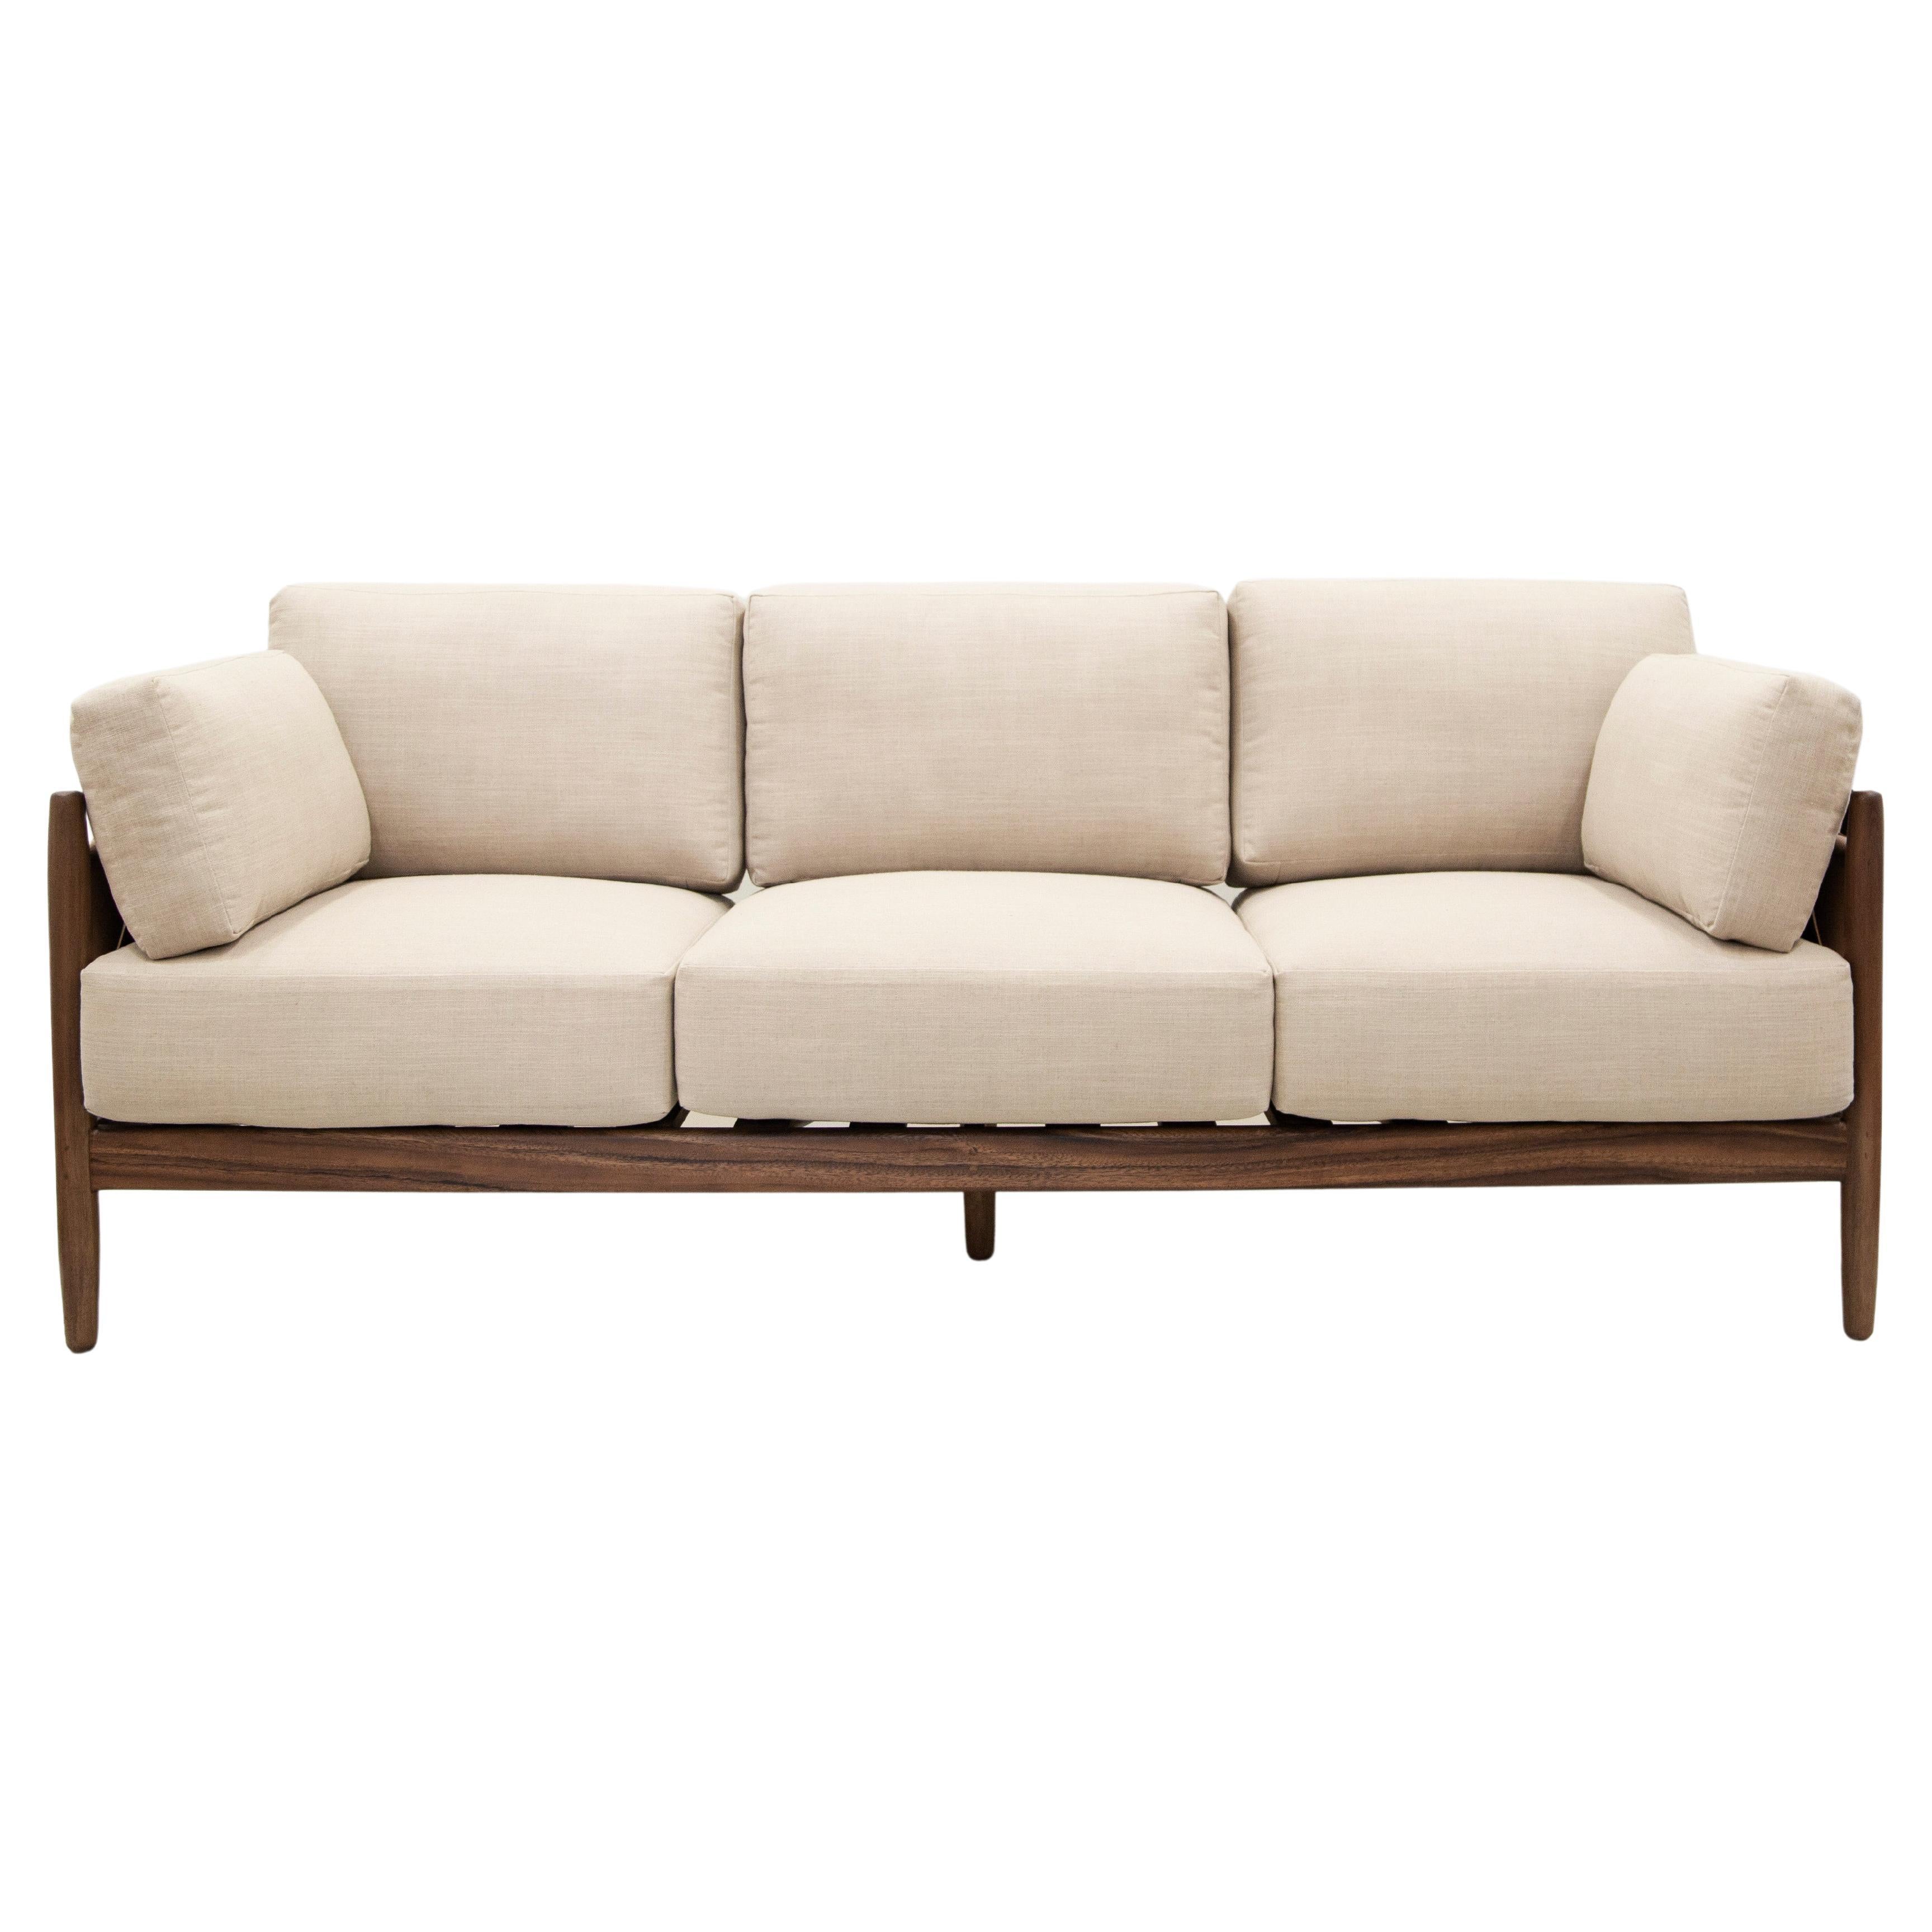 This sofa is perfect for when you want to show the back of it. It doesn’t have to be up against a wall. This contemporary yet classic design is a perfect piece to give your space a distinguished accent. The structure is made of solid Oak wood, the